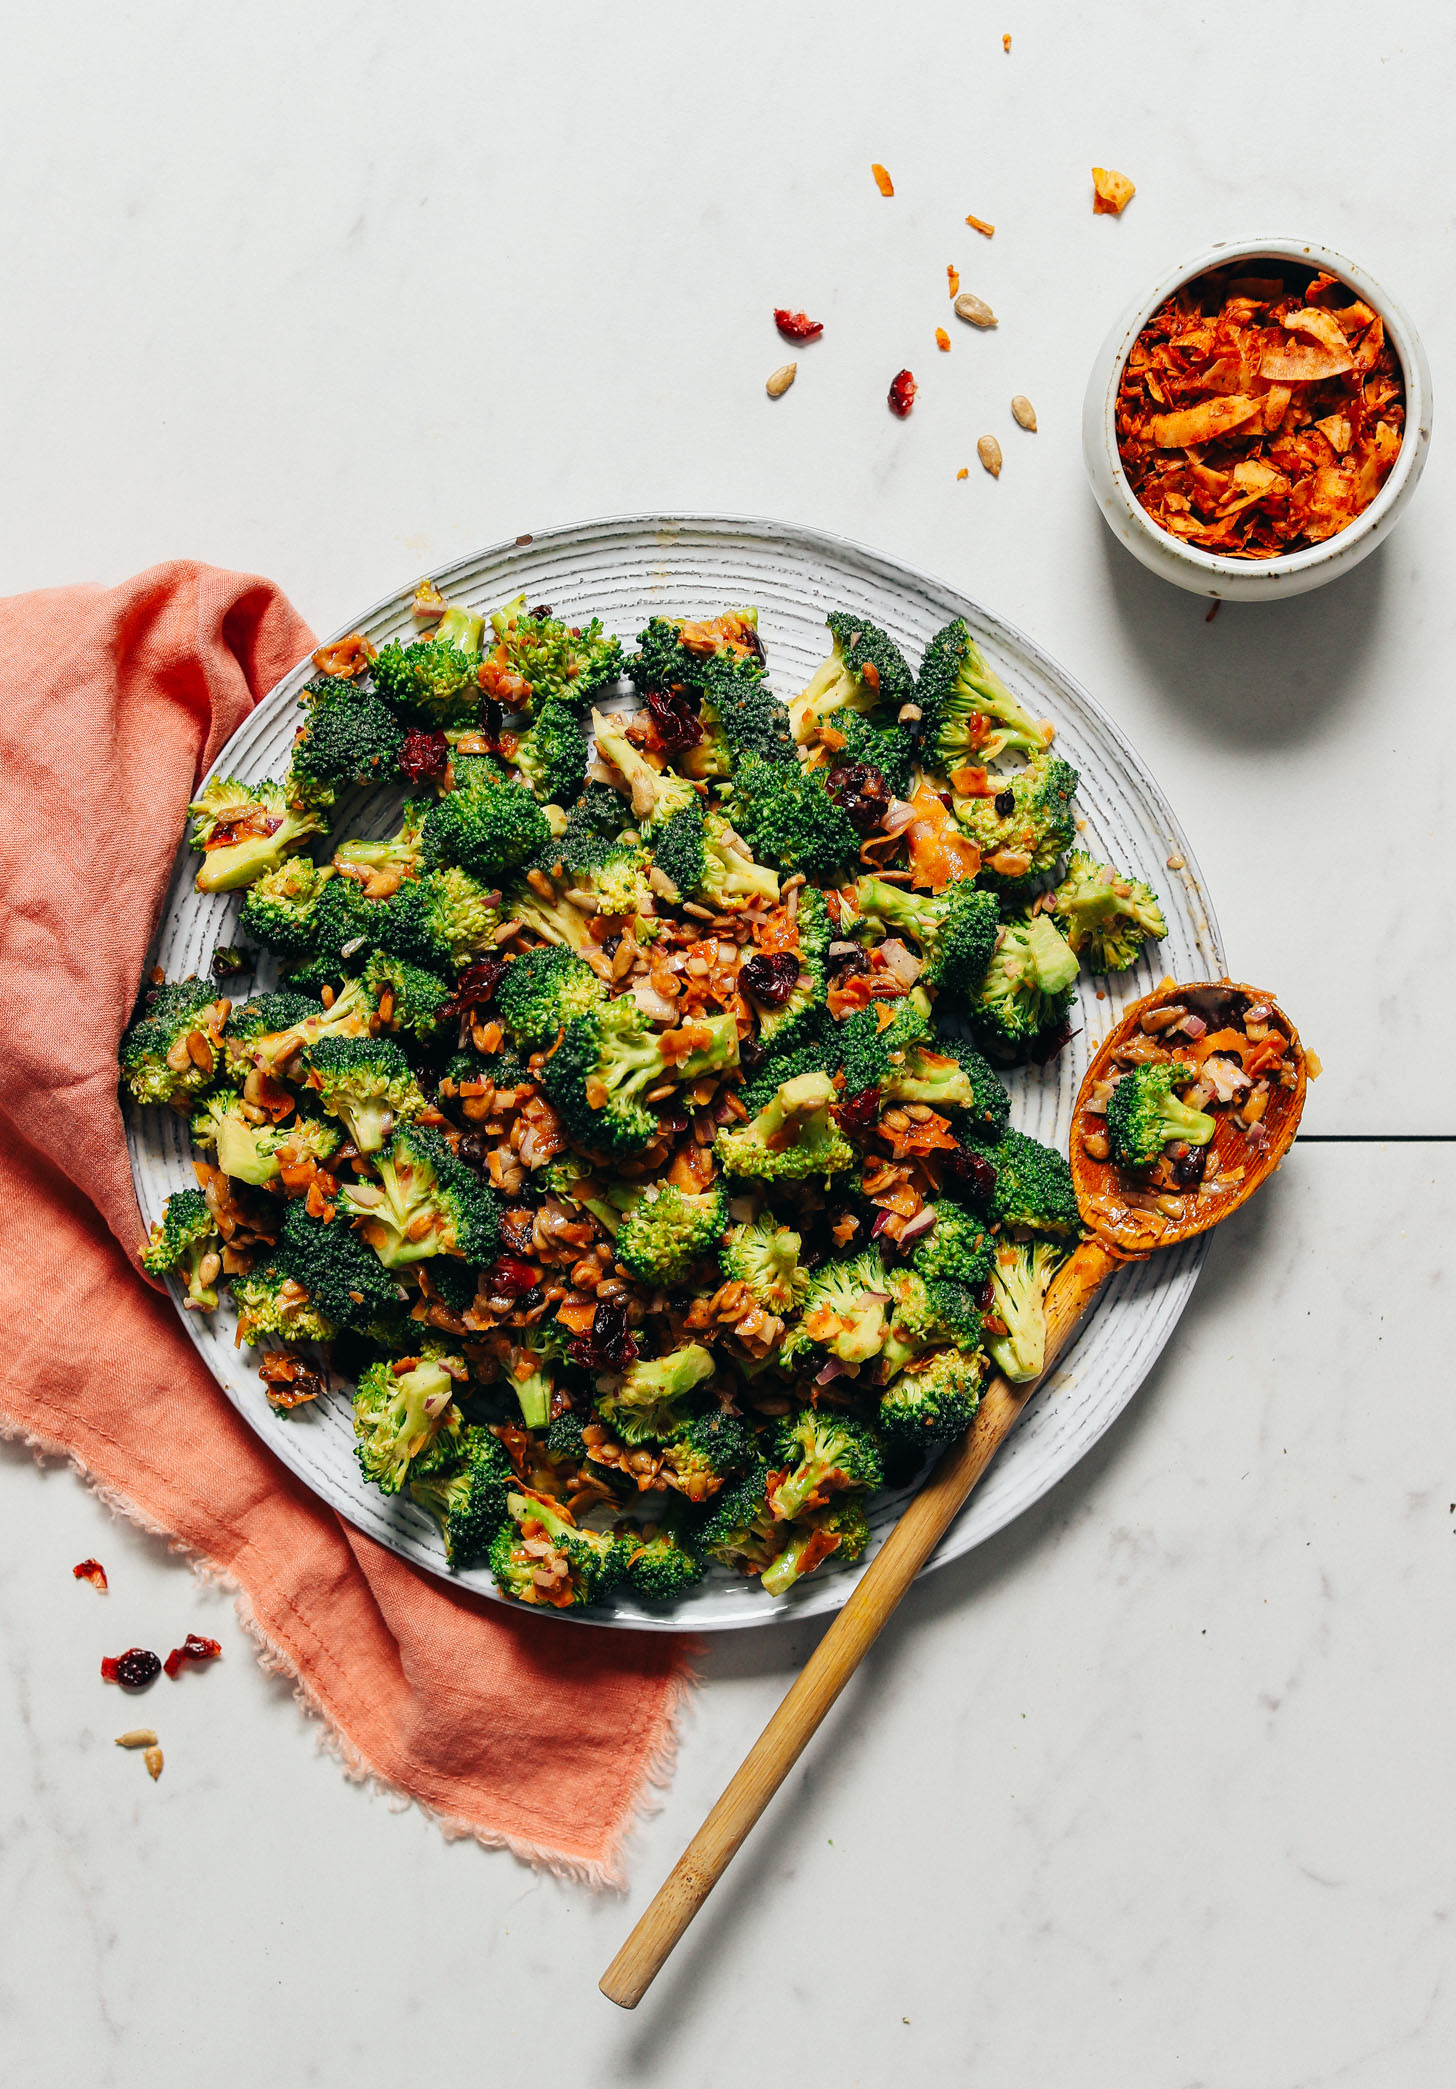 Large plate of our Creamy Vegan Broccoli Salad recipe next to a bowl of coconut bacon